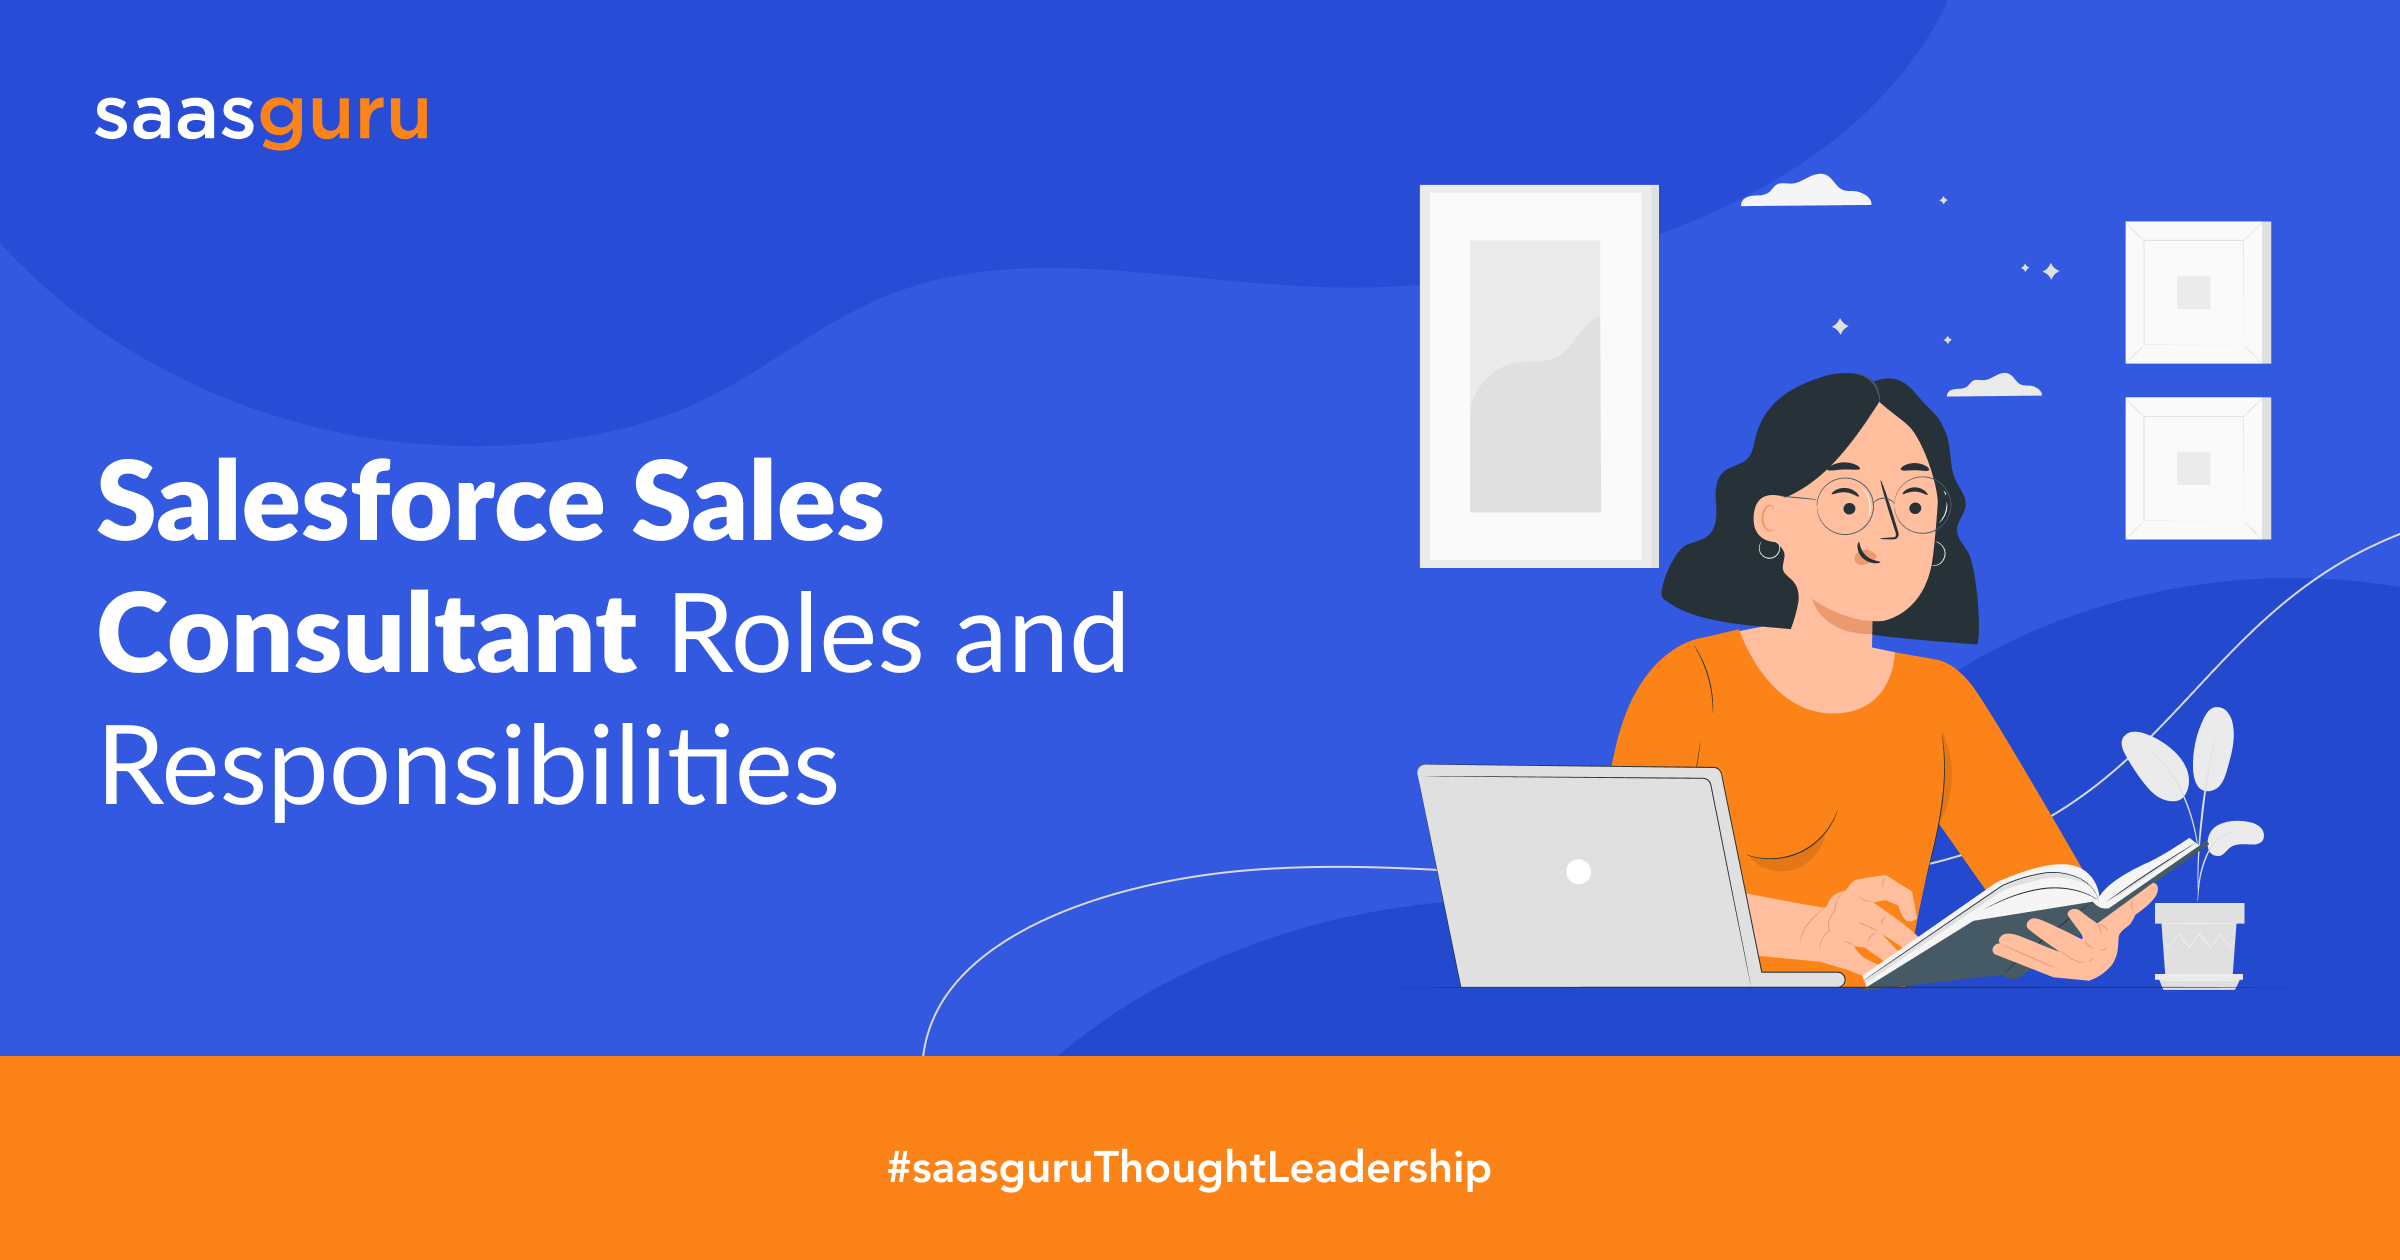 Salesforce Sales Consultant Roles and Responsibilities